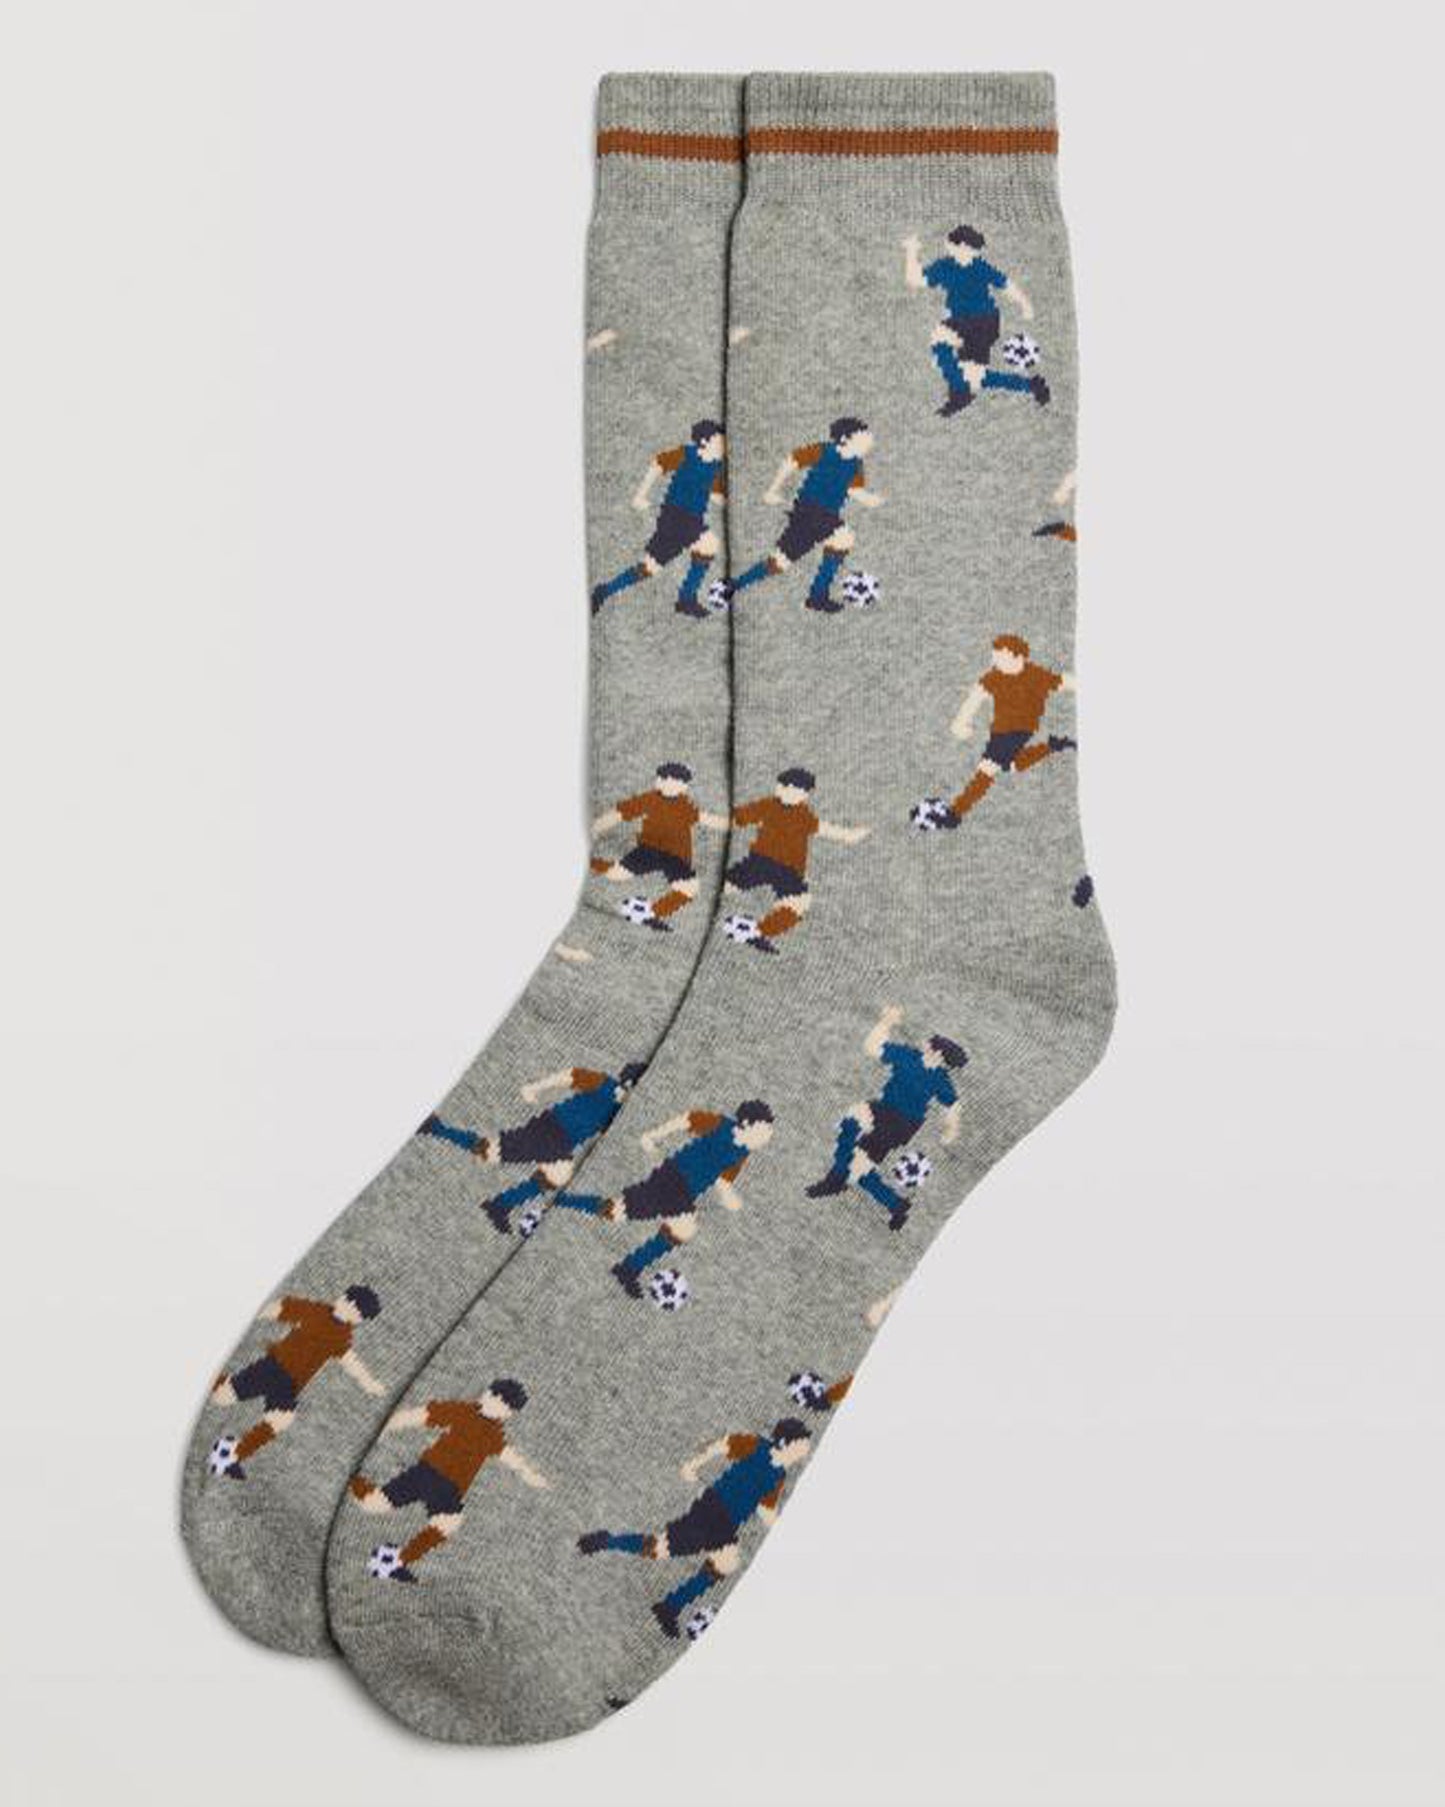 Ysabel Mora 22883 Football Socks - Light grey cotton socks with a warm thick terry lining, football players pattern in shades of blue and rust and a rust stripe on the cuff.